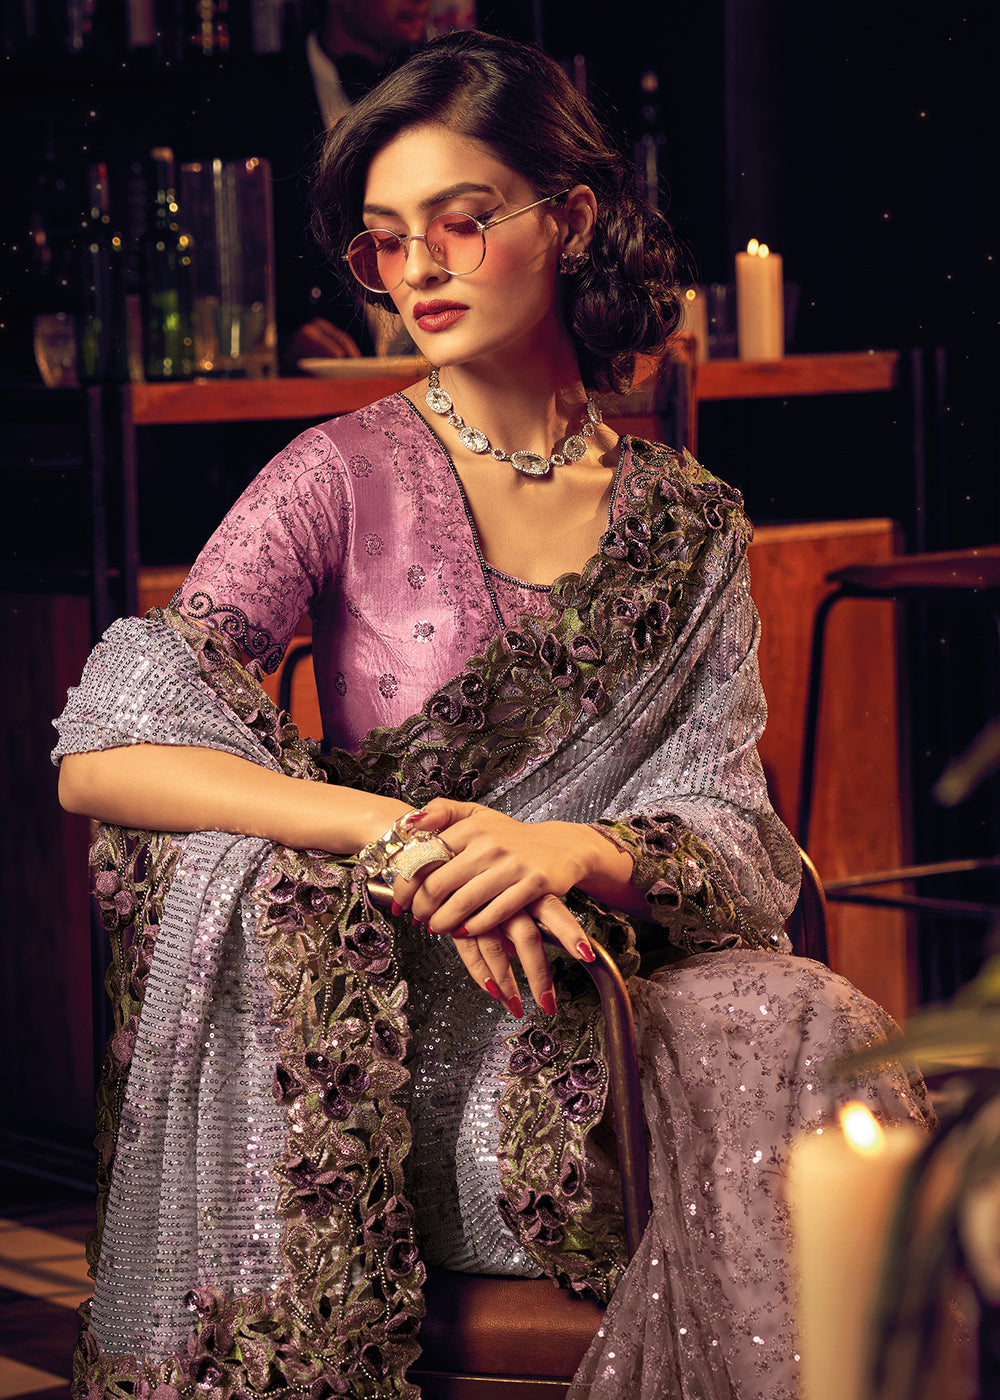 Shop Now Bridal Party Divine Purple Premium Net Designer Saree from Empress Clothing in USA, UK, Canada & Worldwide.